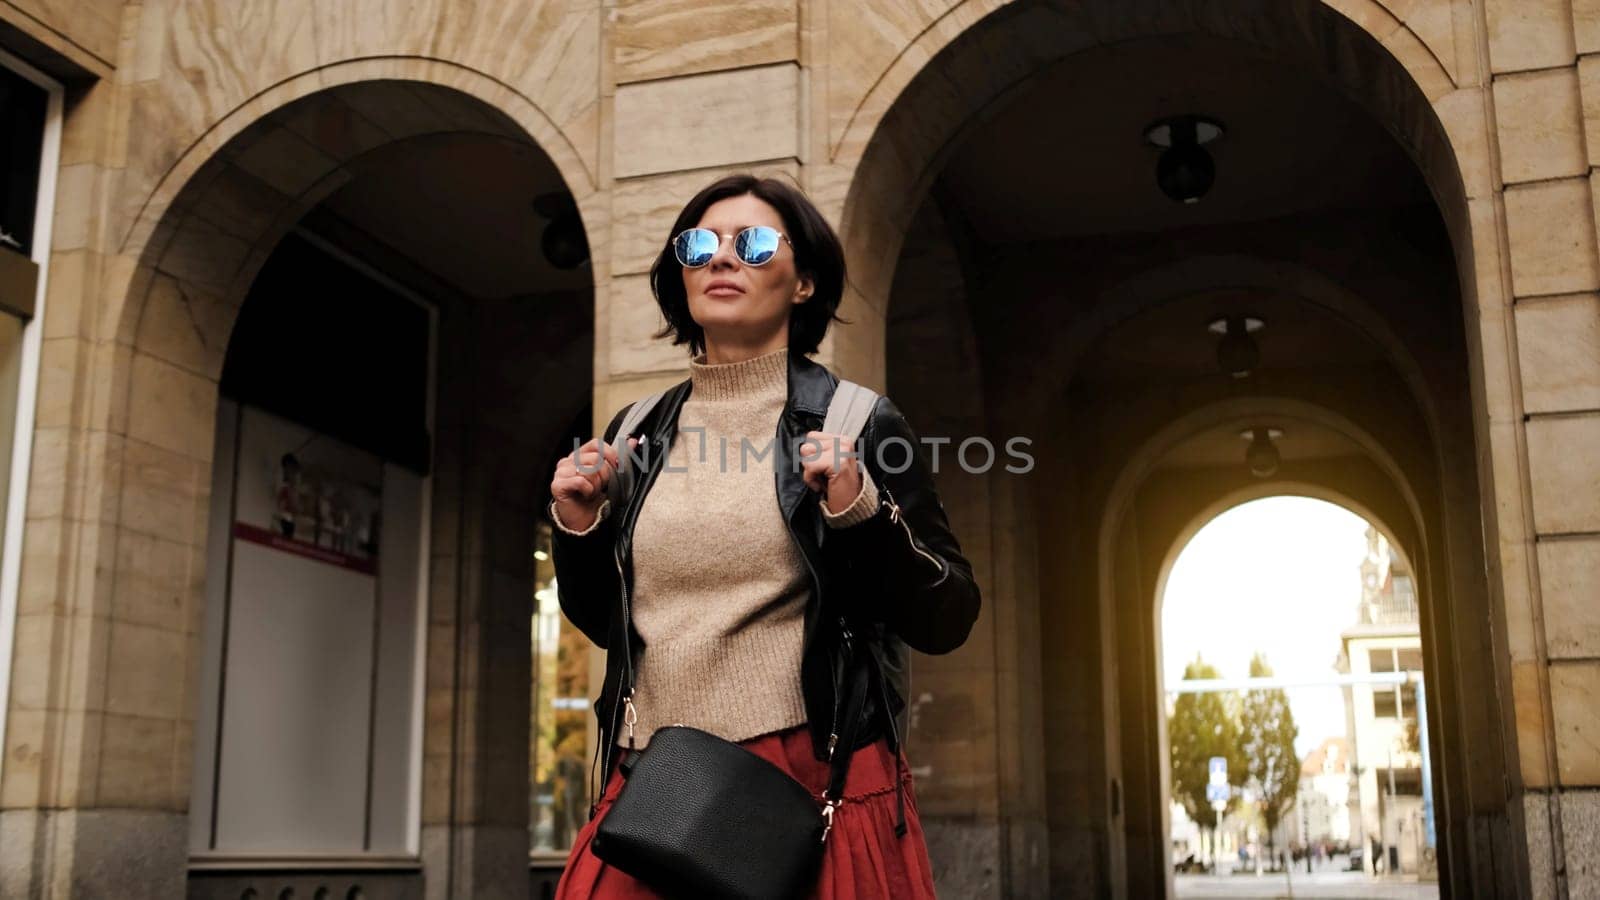 Attractive Woman In Sunglasses Walks In City With Backpack, Female Tourist Looking Around